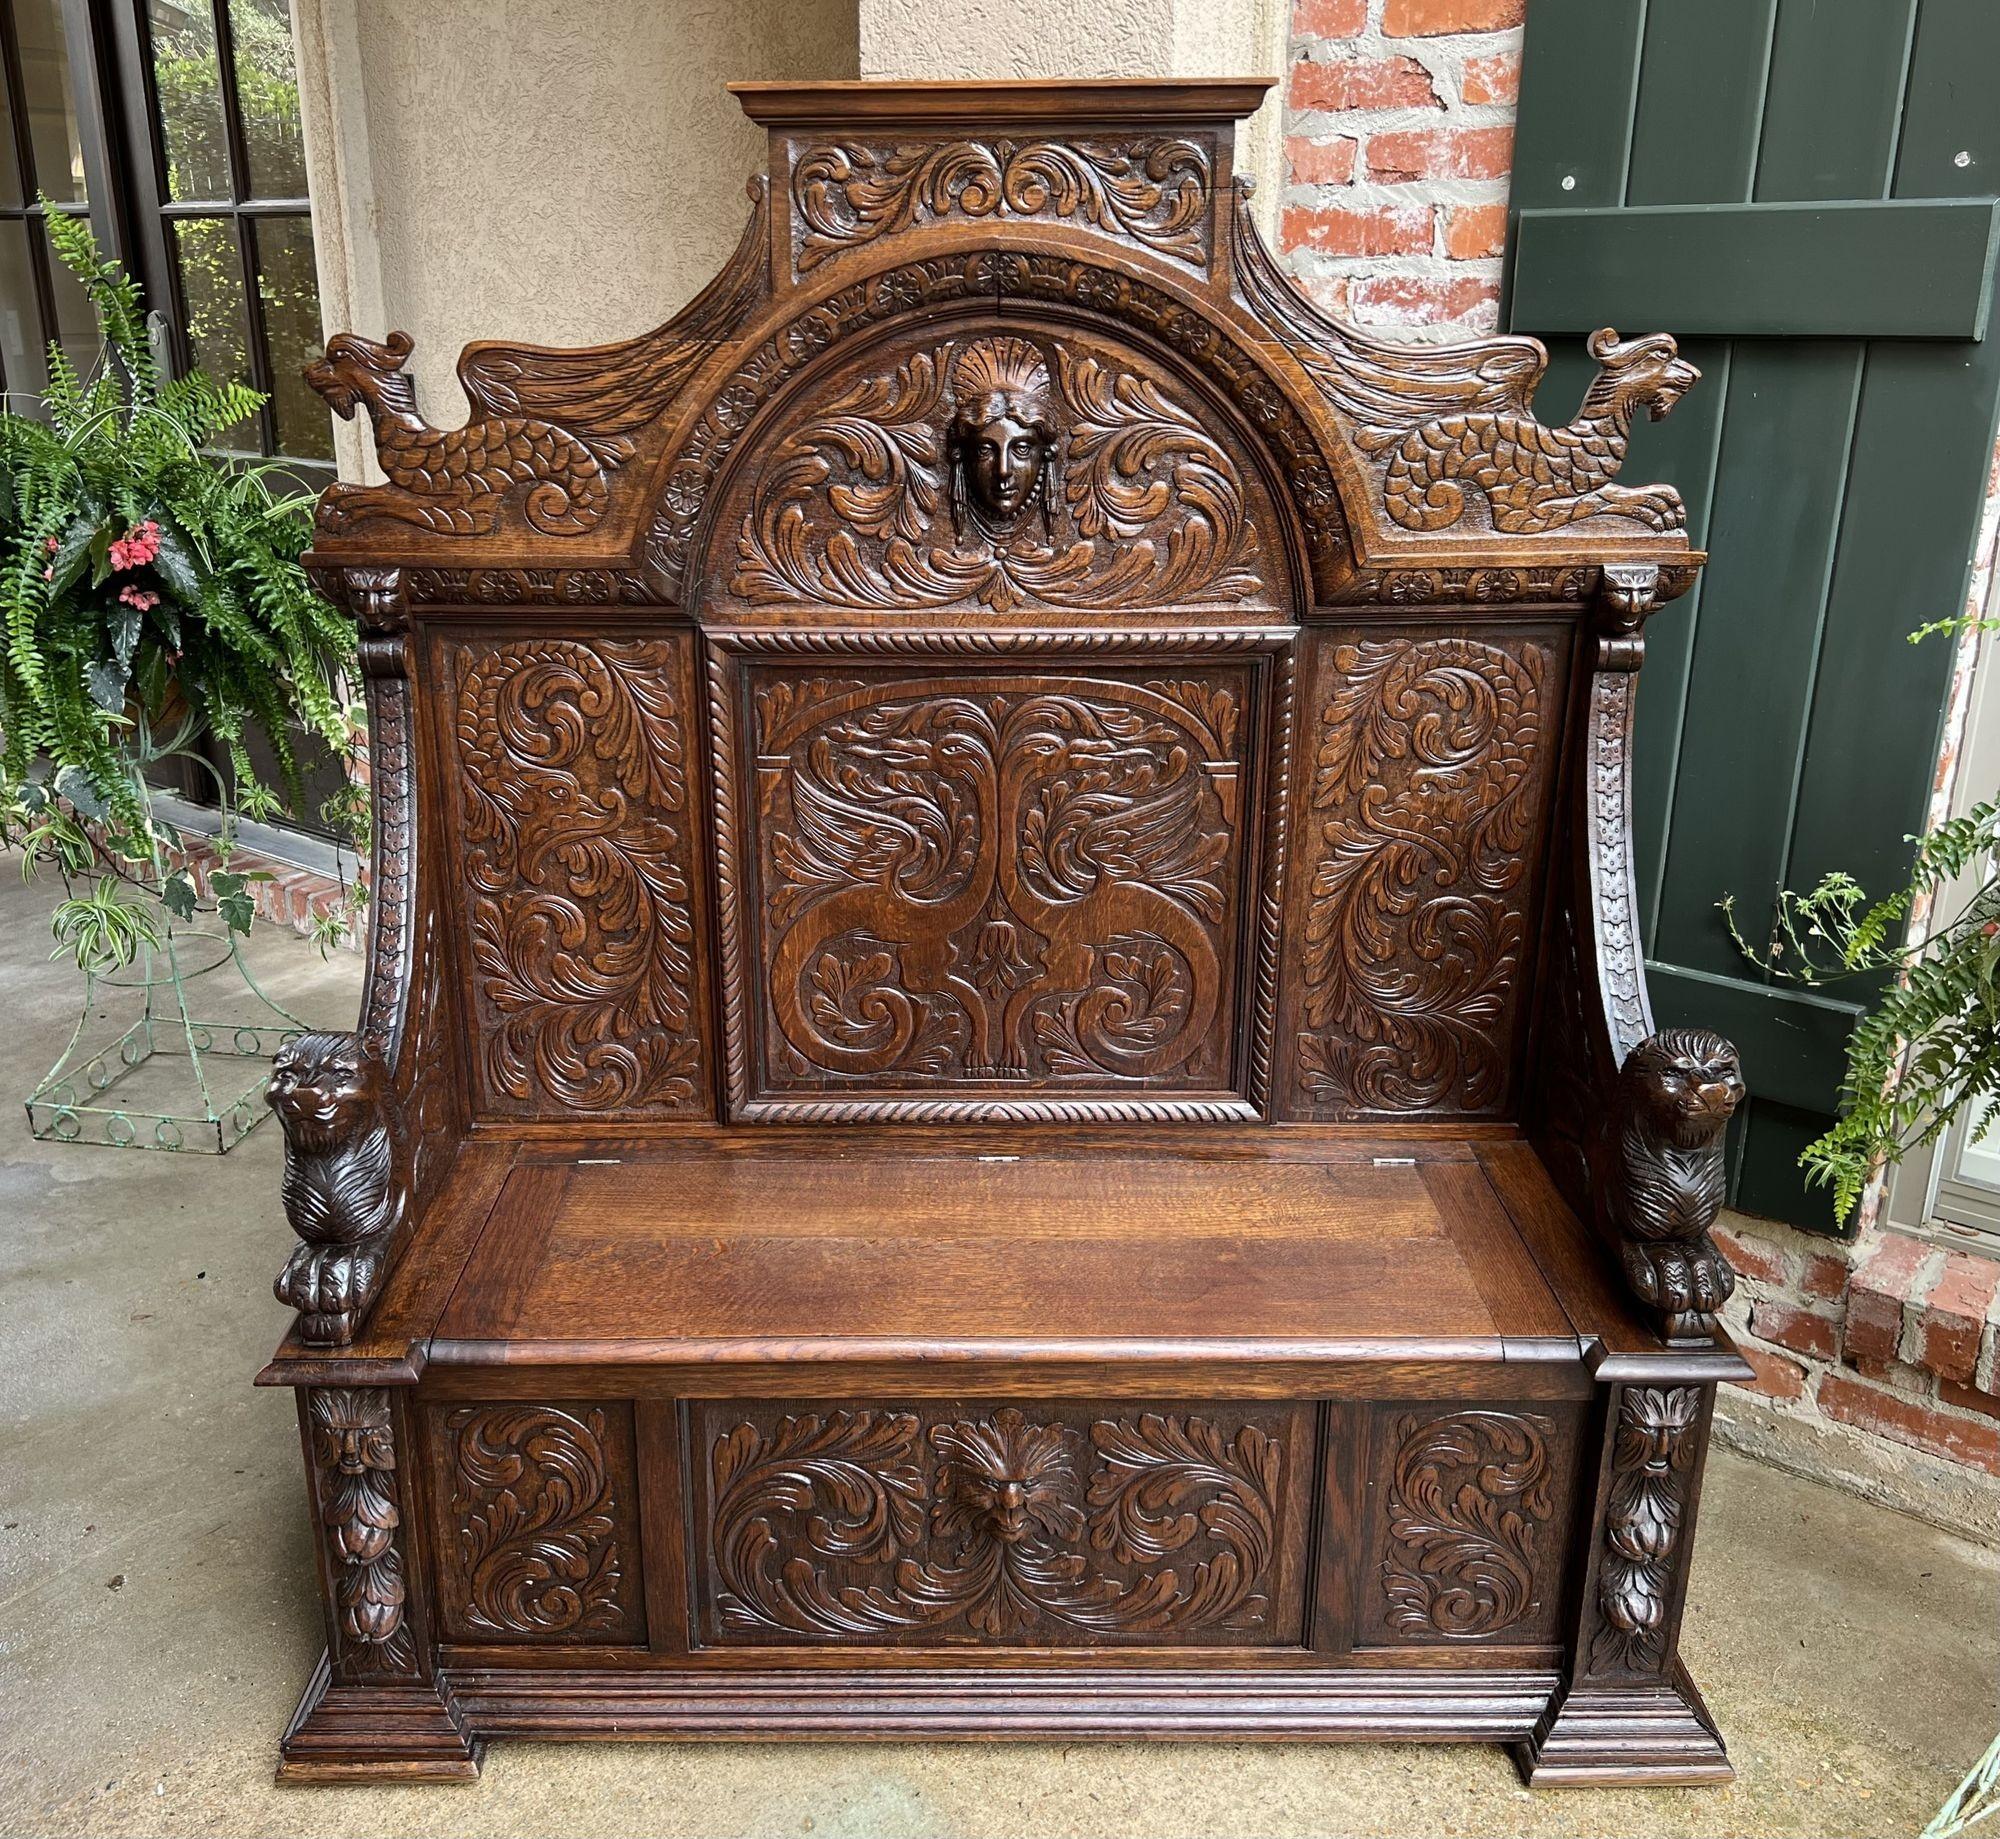 19th Century French carved oak hall bench trunk chest renaissance gothic settle.
 
Direct from France, a massive antique French hall bench, with outstanding carvings!
Huge carved crown with sitting serpents on each end. Arched and shaped panels,